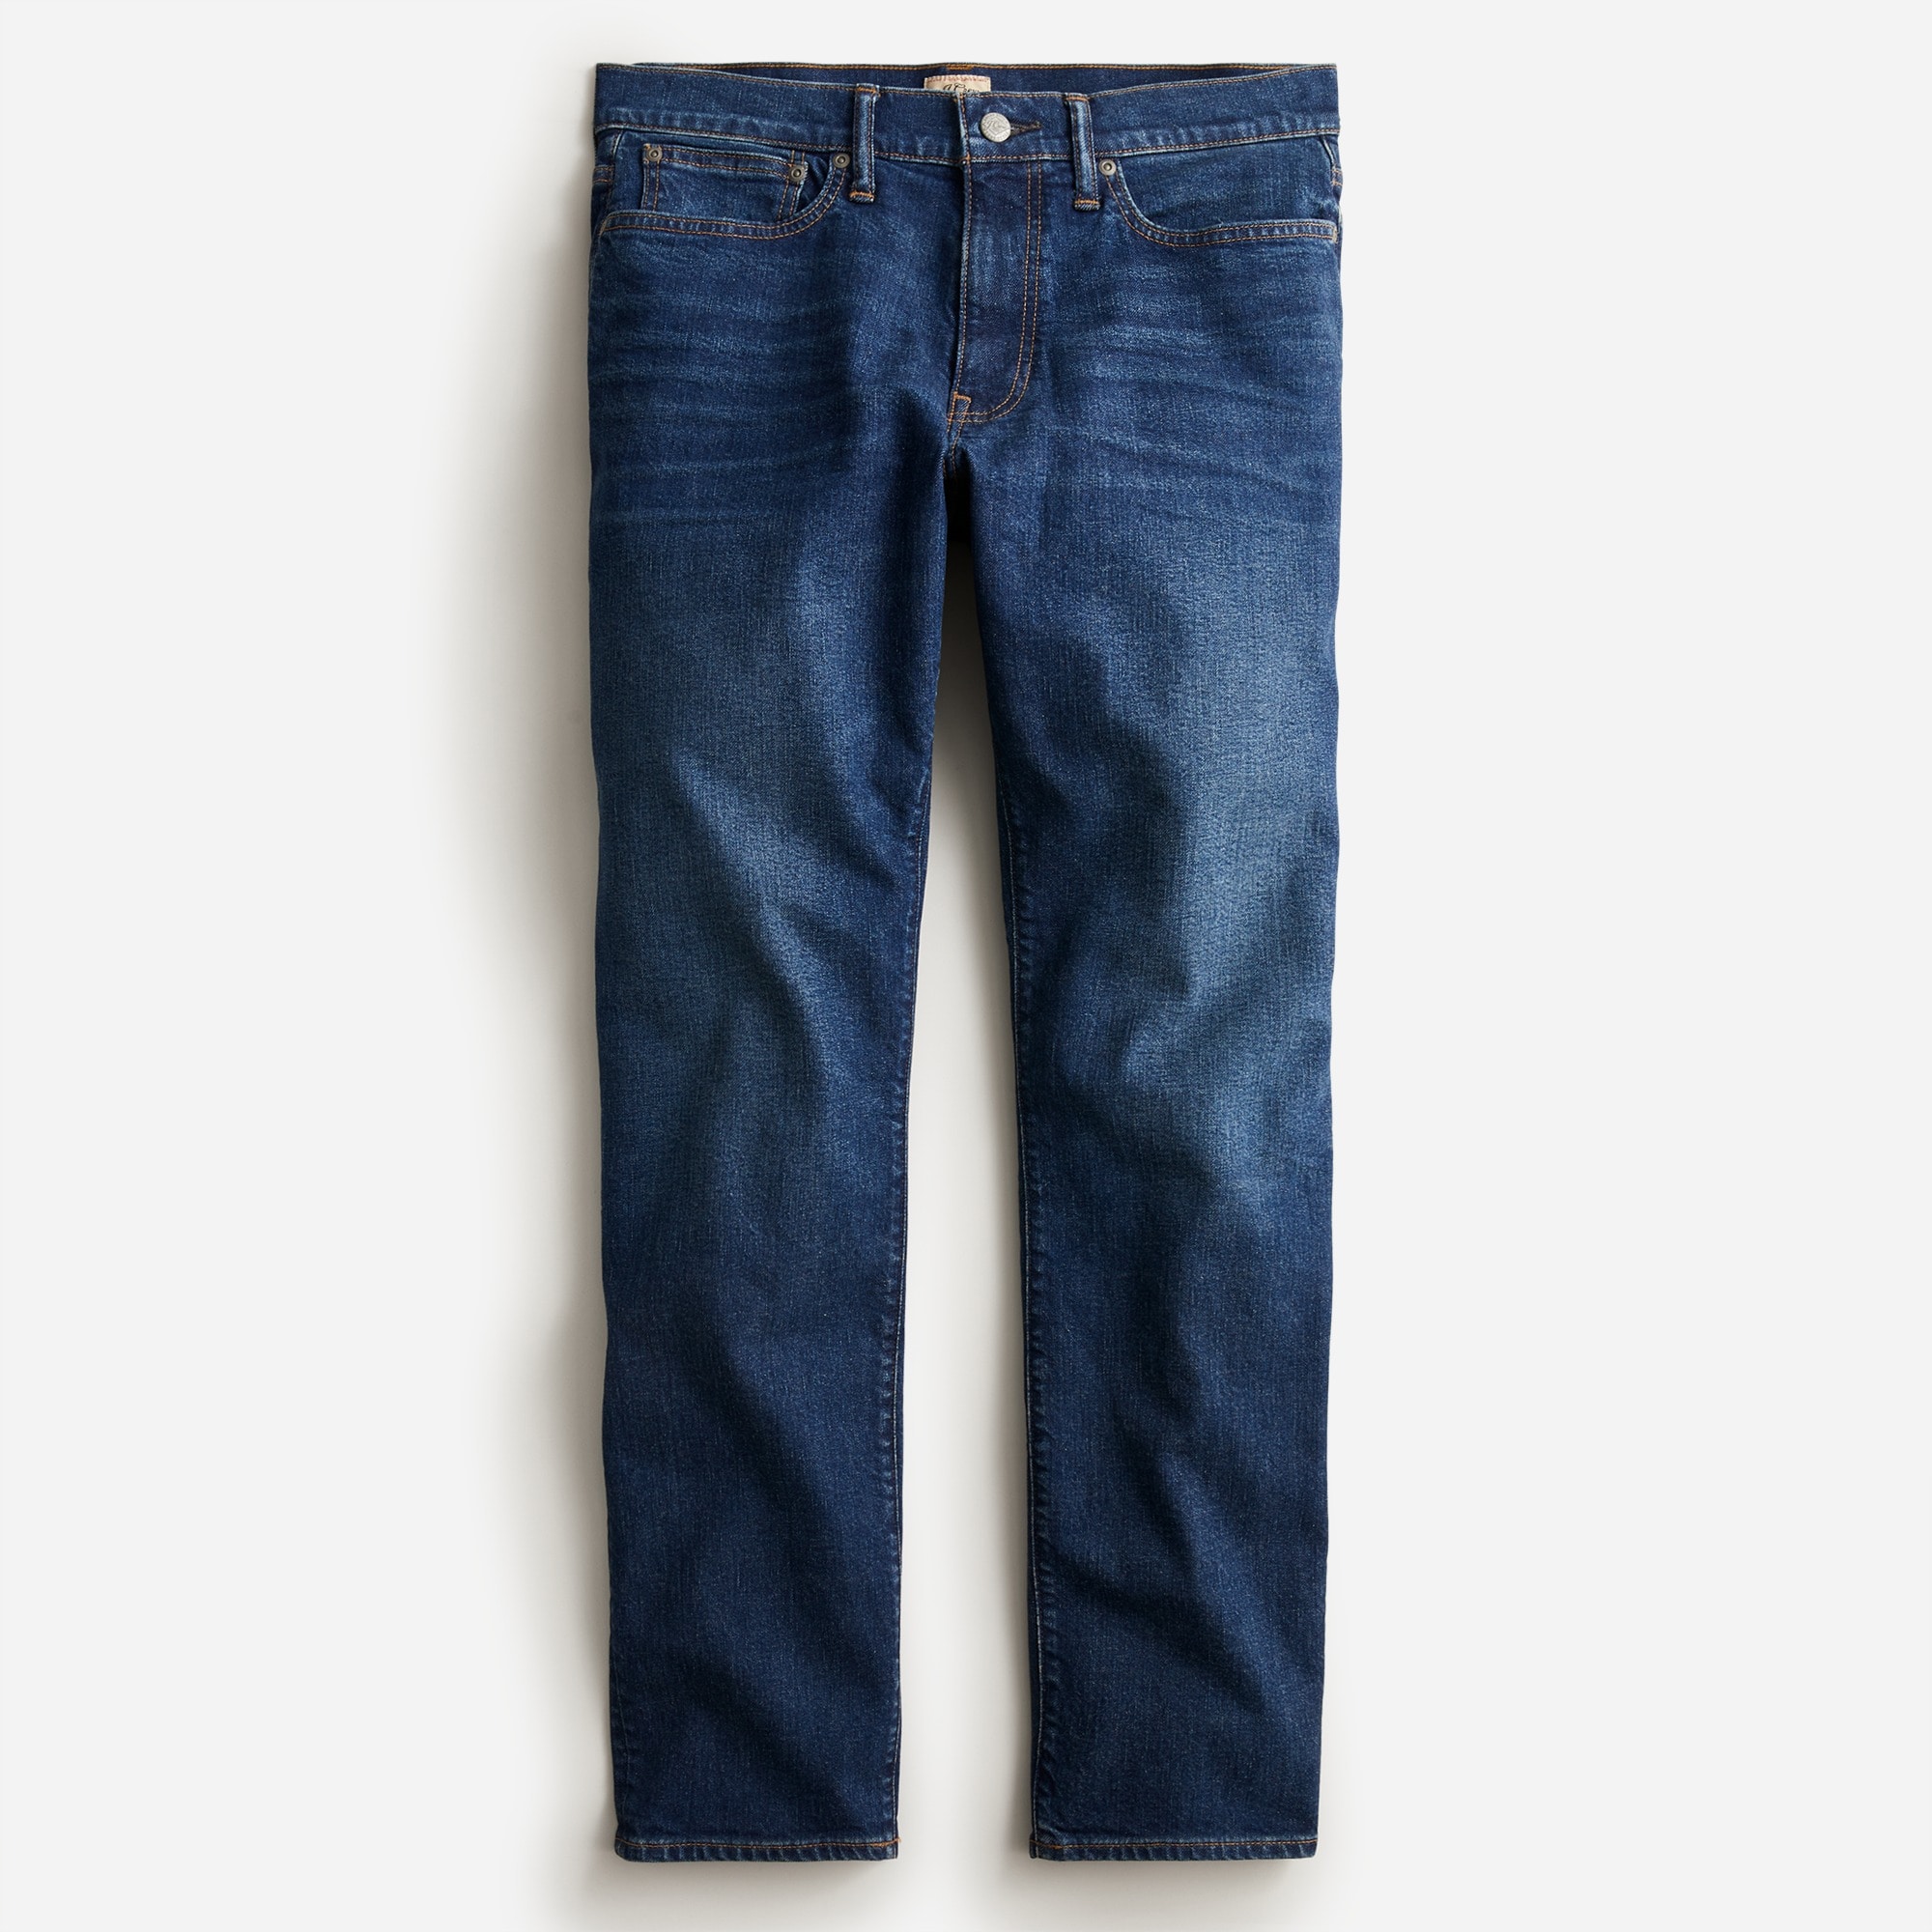  1040 Athletic Tapered-fit stretch jean in one-year wash